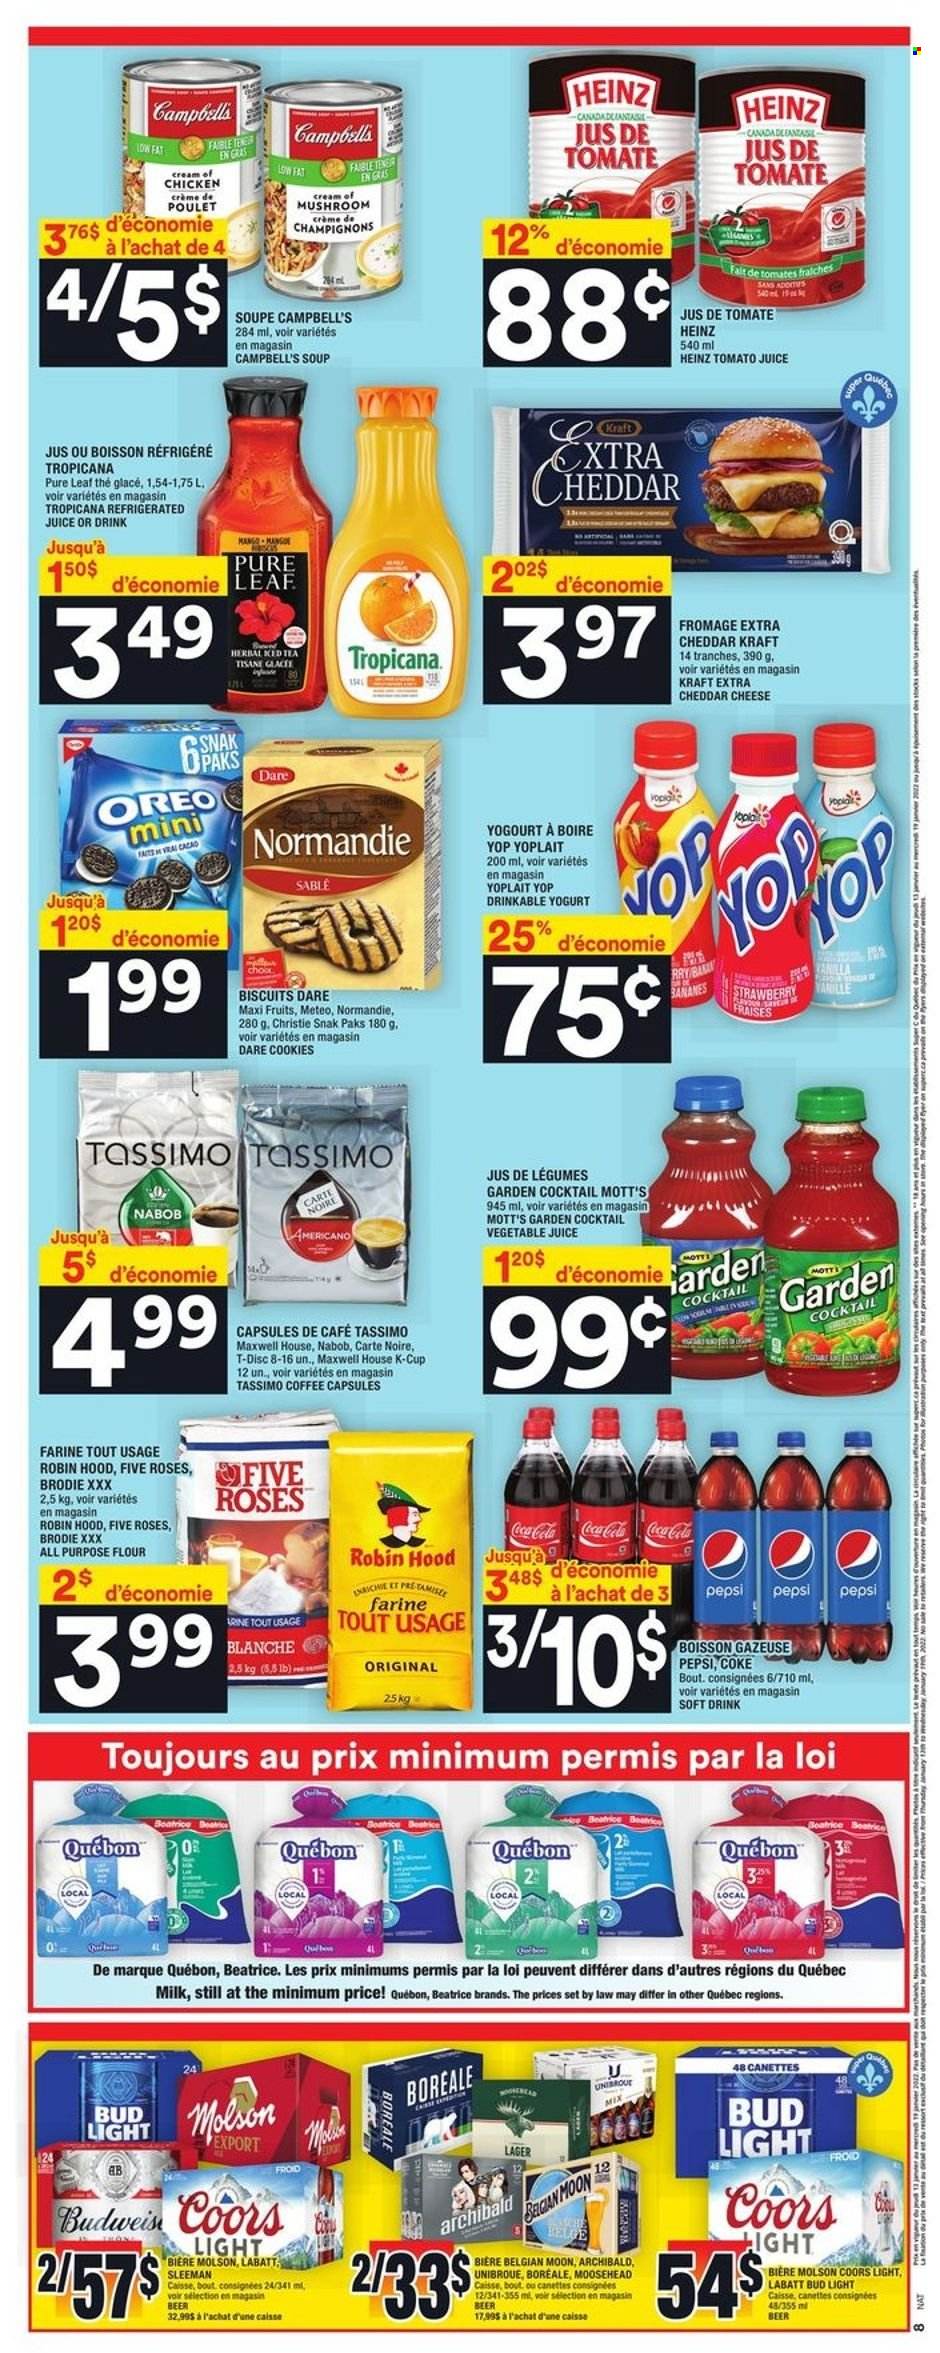 thumbnail - Super C Flyer - January 13, 2022 - January 19, 2022 - Sales products - Mott's, Campbell's, soup, Kraft®, cheddar, cheese, yoghurt, Yoplait, milk, cookies, biscuit, all purpose flour, flour, Coca-Cola, tomato juice, Pepsi, juice, soft drink, vegetable juice, Maxwell House, Pure Leaf, coffee, coffee capsules, K-Cups, beer, Bud Light, Lager, XTRA, Oreo, Heinz, Coors. Page 2.